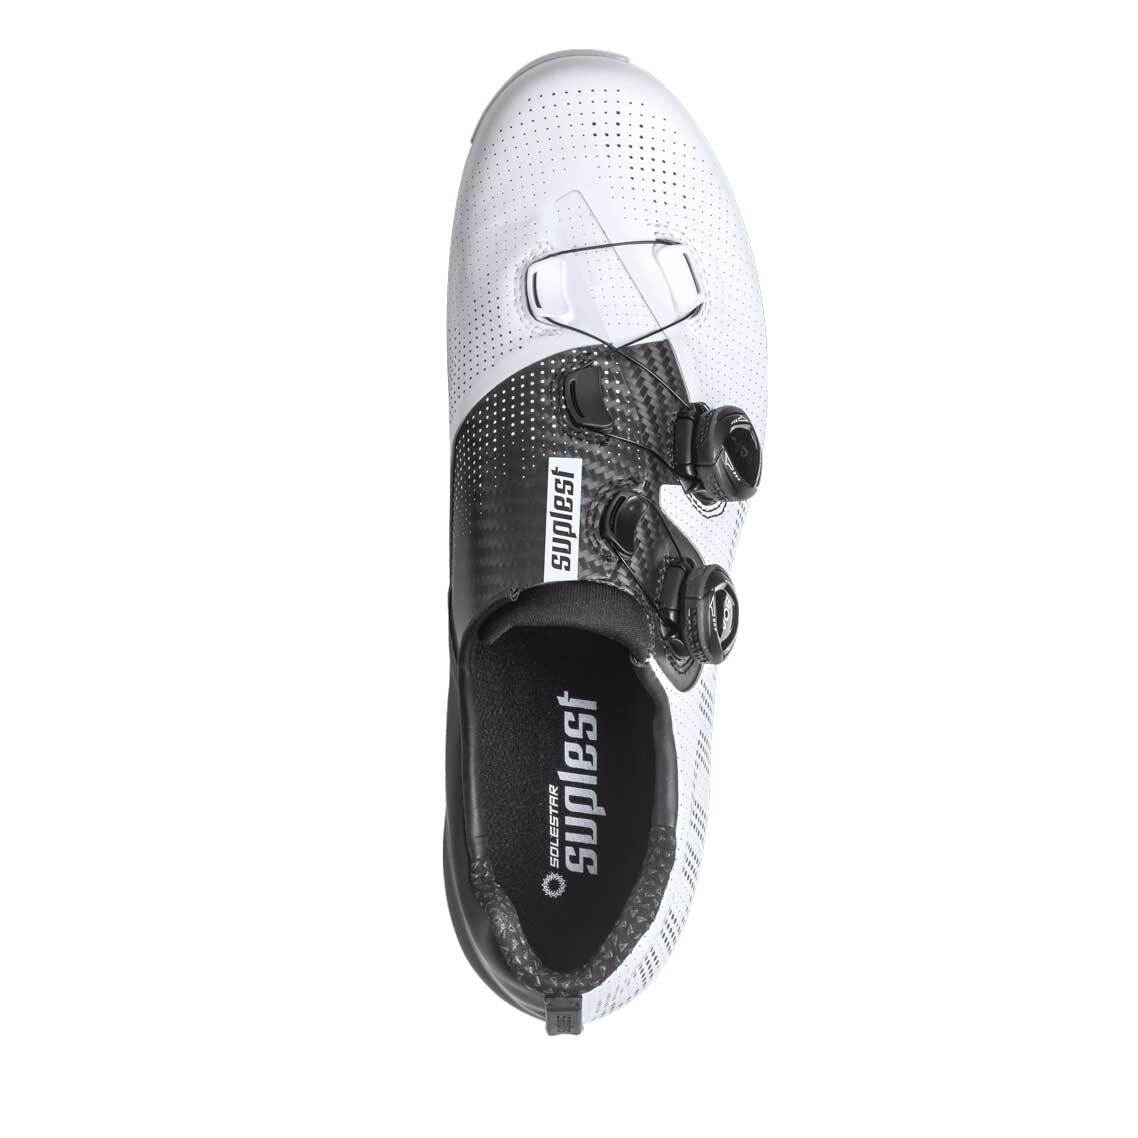 Download 2020 Suplest Edge+ Pro Road Carbon Cycling Shoes - White ...